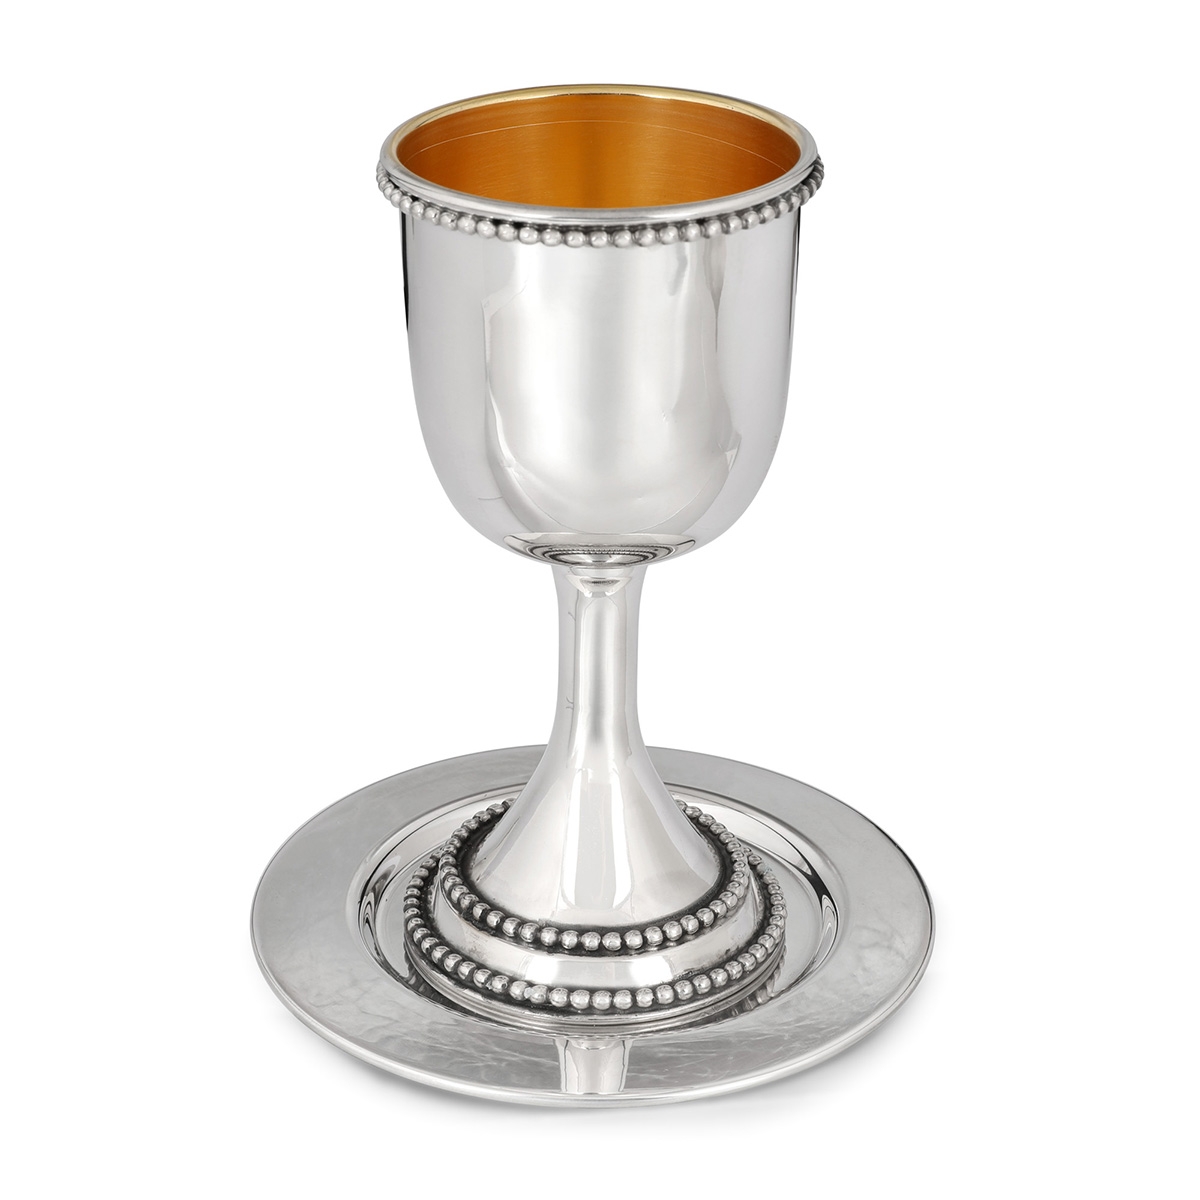 Bier Judaica Handcrafted Sterling Silver Kiddush Cup With Bead Motif - 1